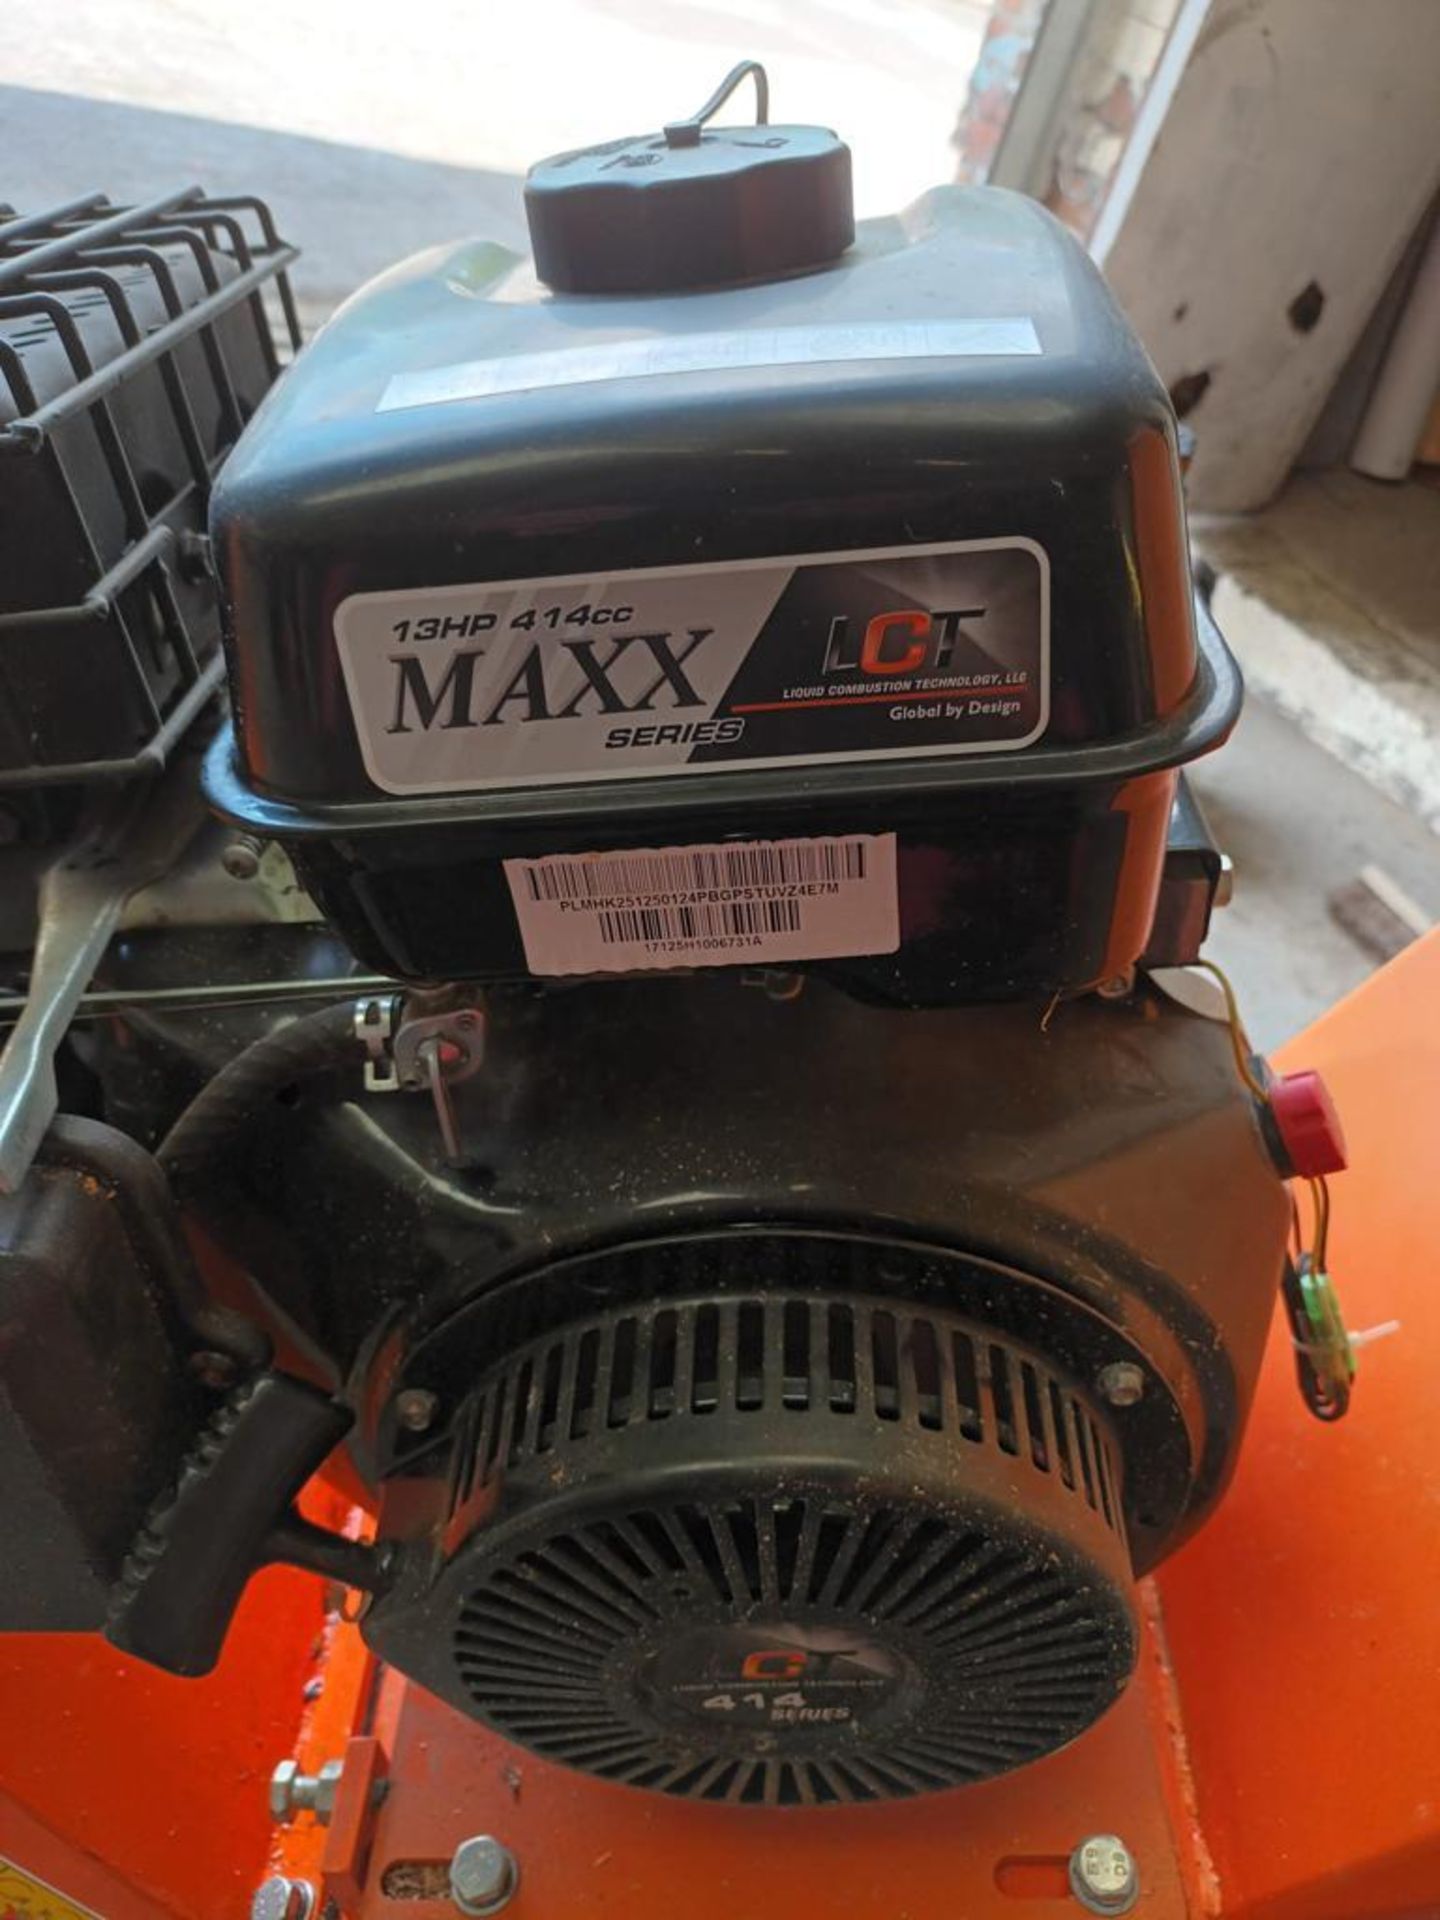 Pro Wood Chipper with MAXX 414cc Series engine - Image 5 of 6